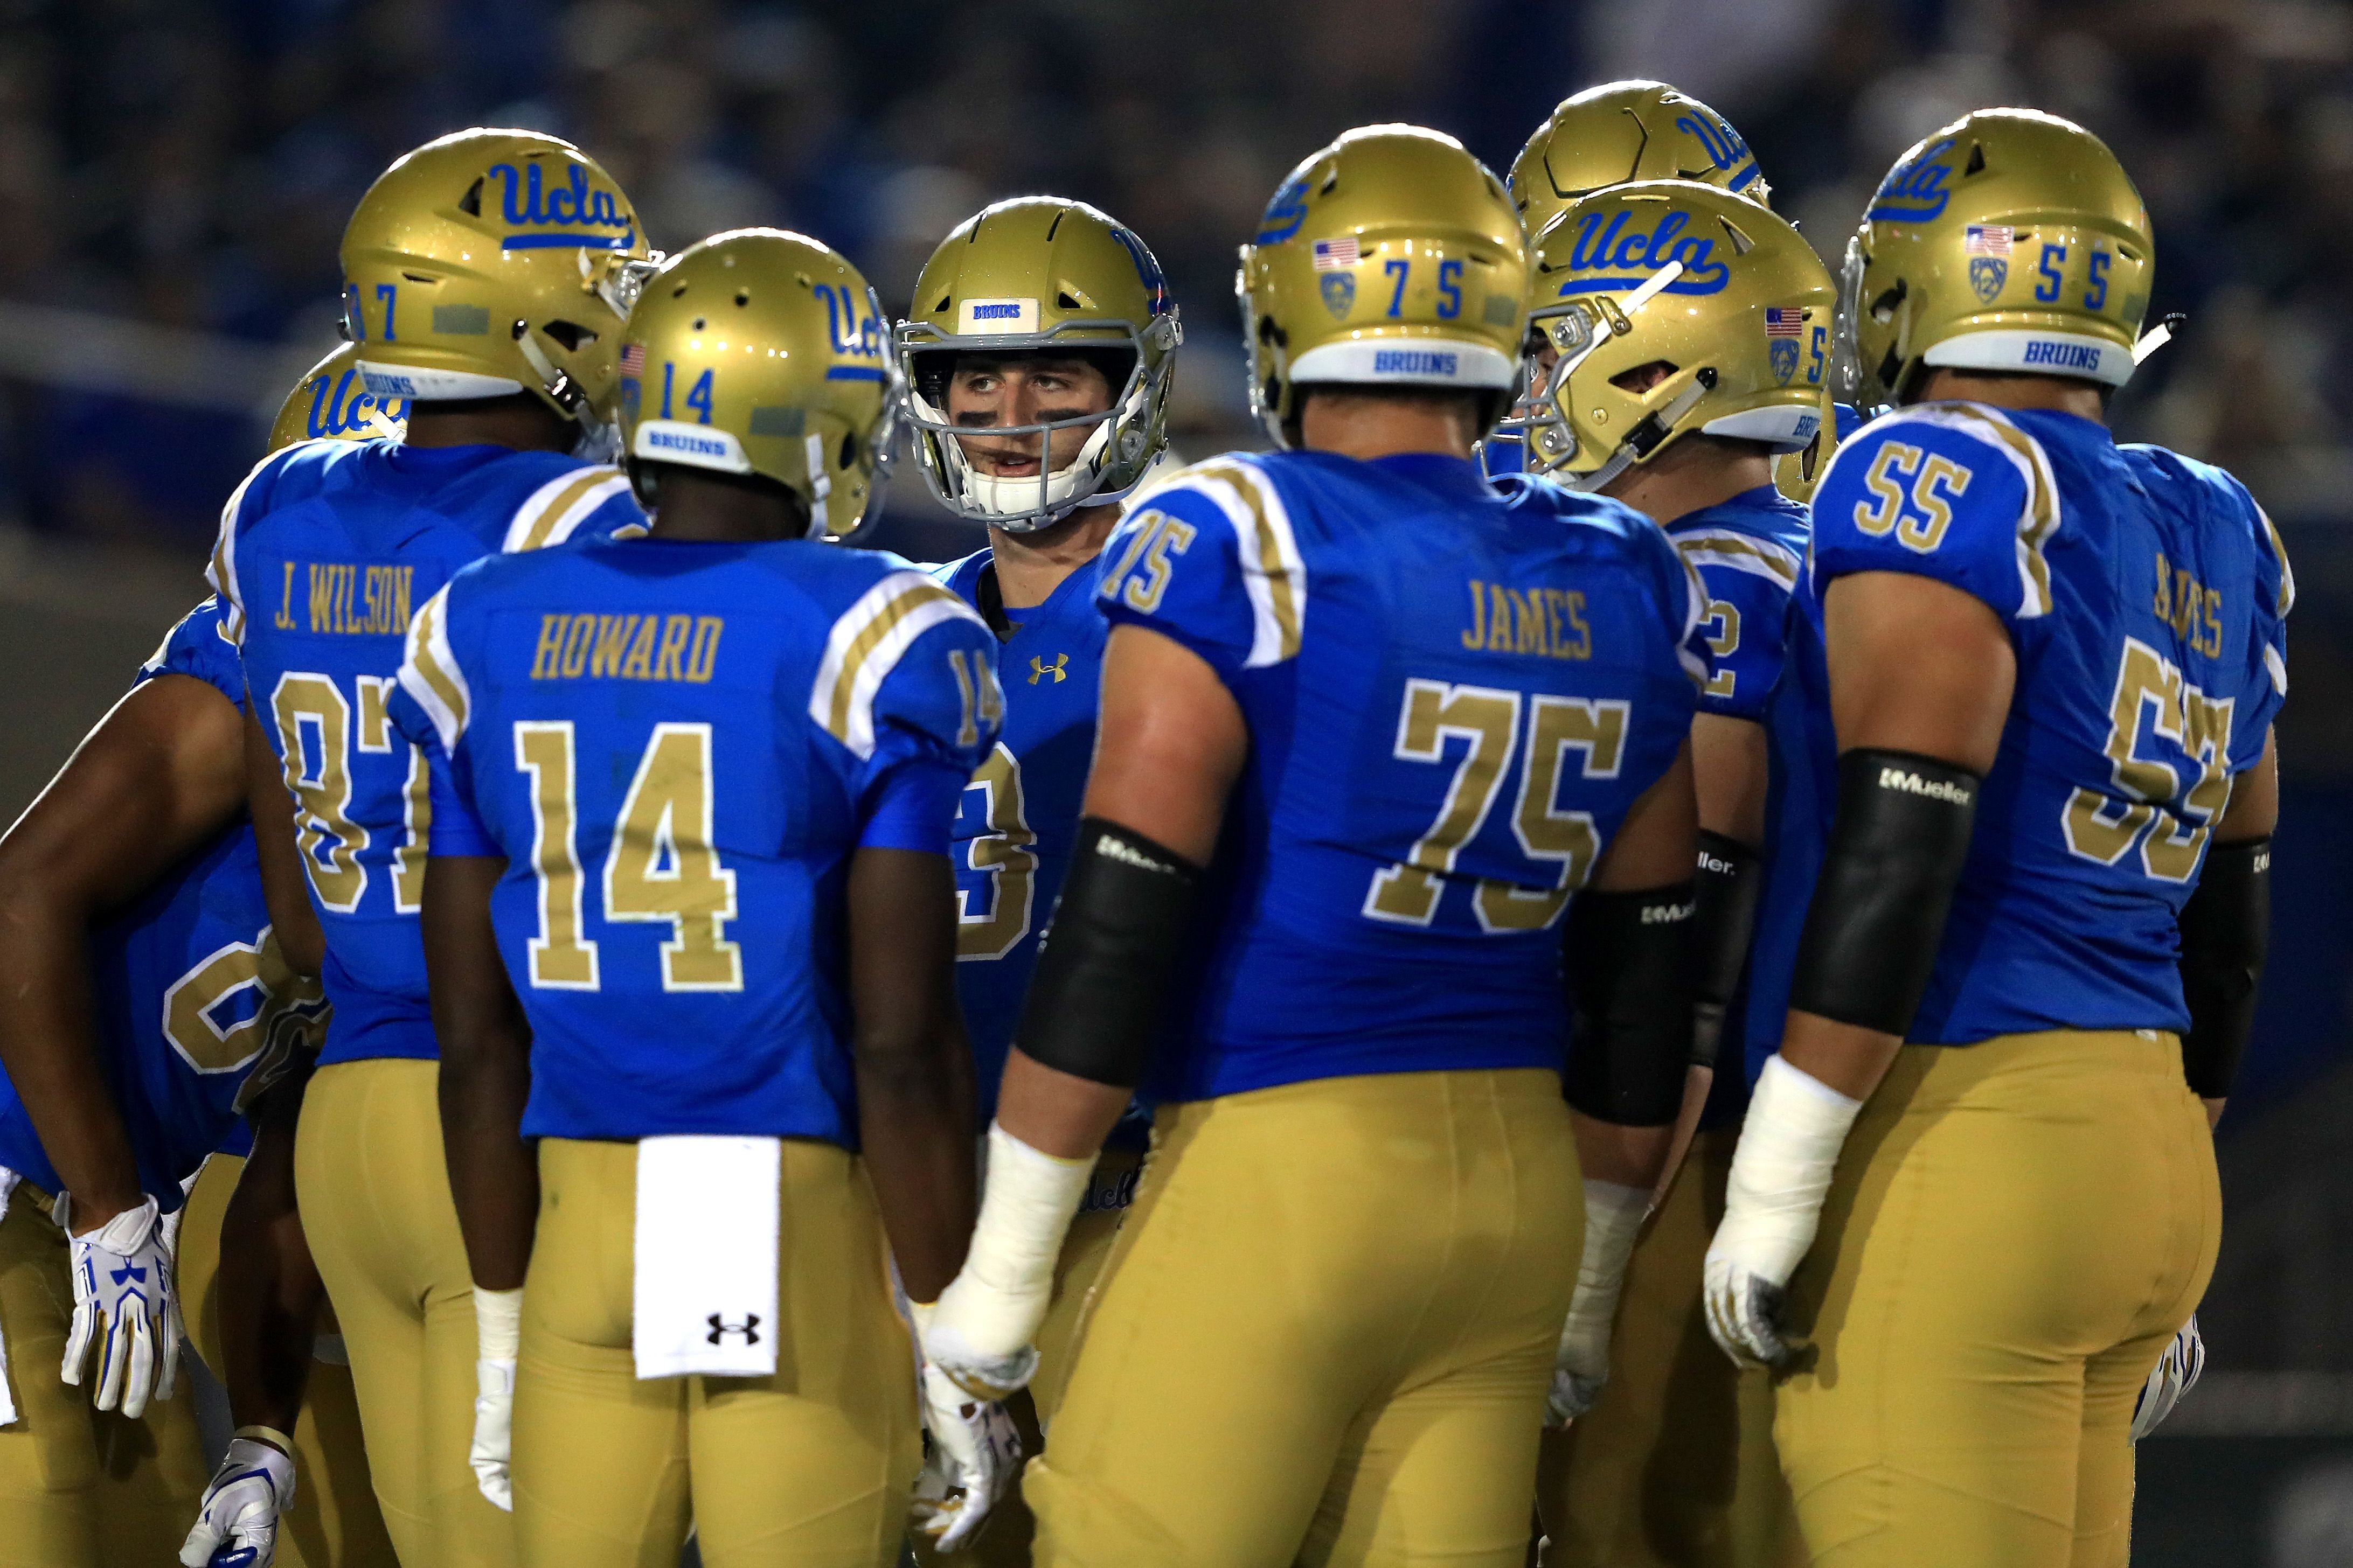 UCLA Football Cactus Bowl 2017 game info, media events, hotels, swag bag